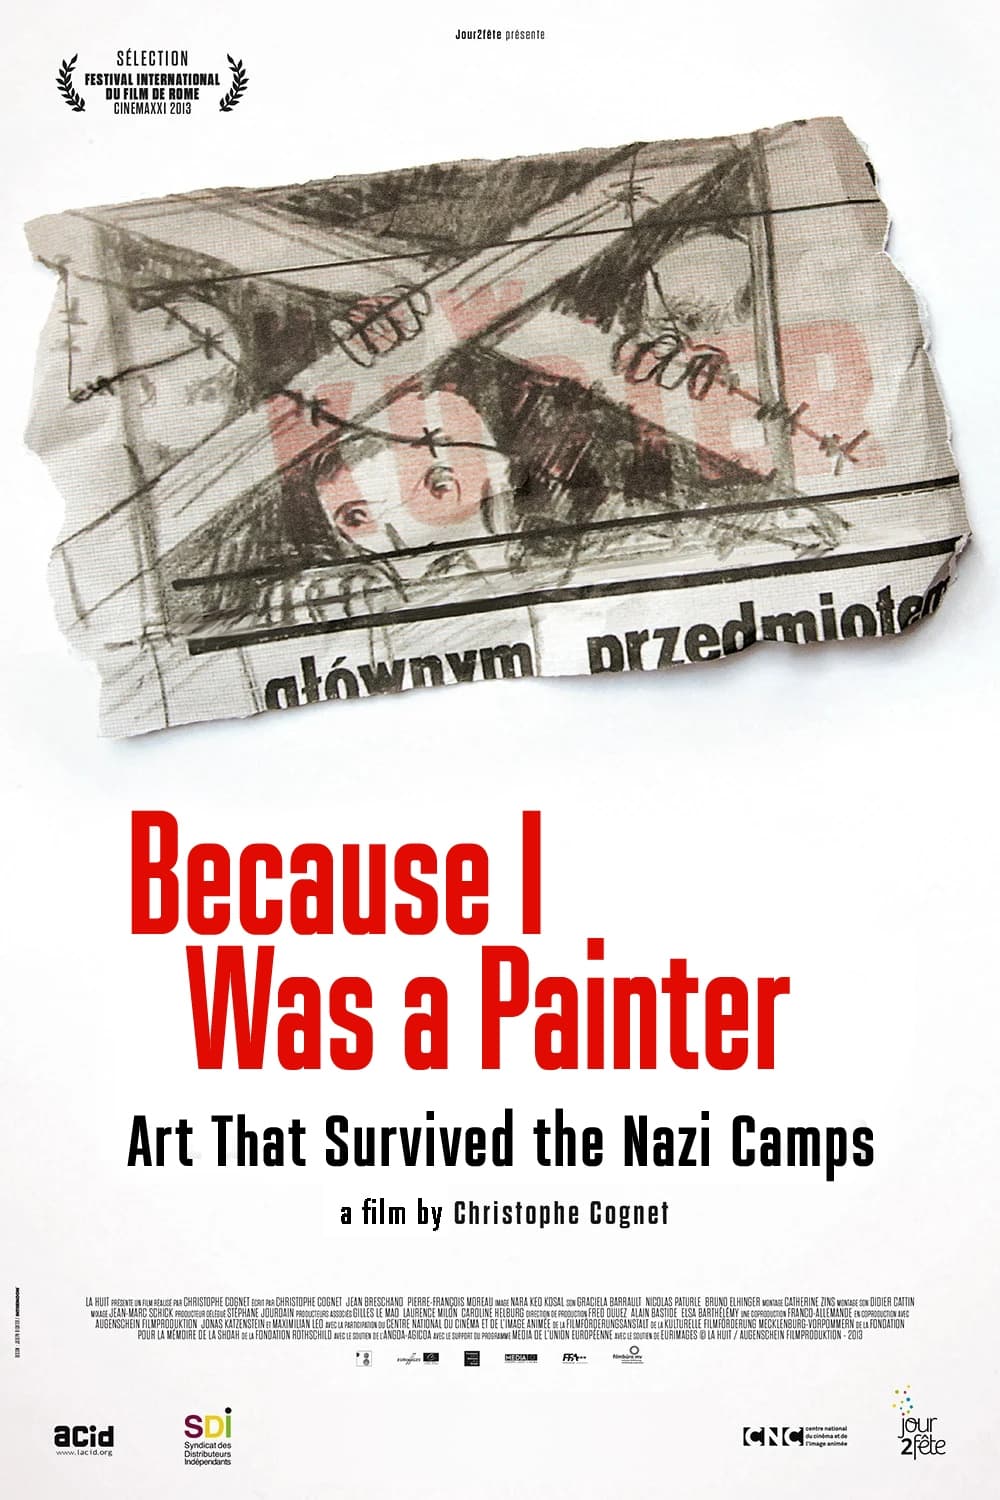 Because I Was a Painter: Art That Survived the Nazi Camps